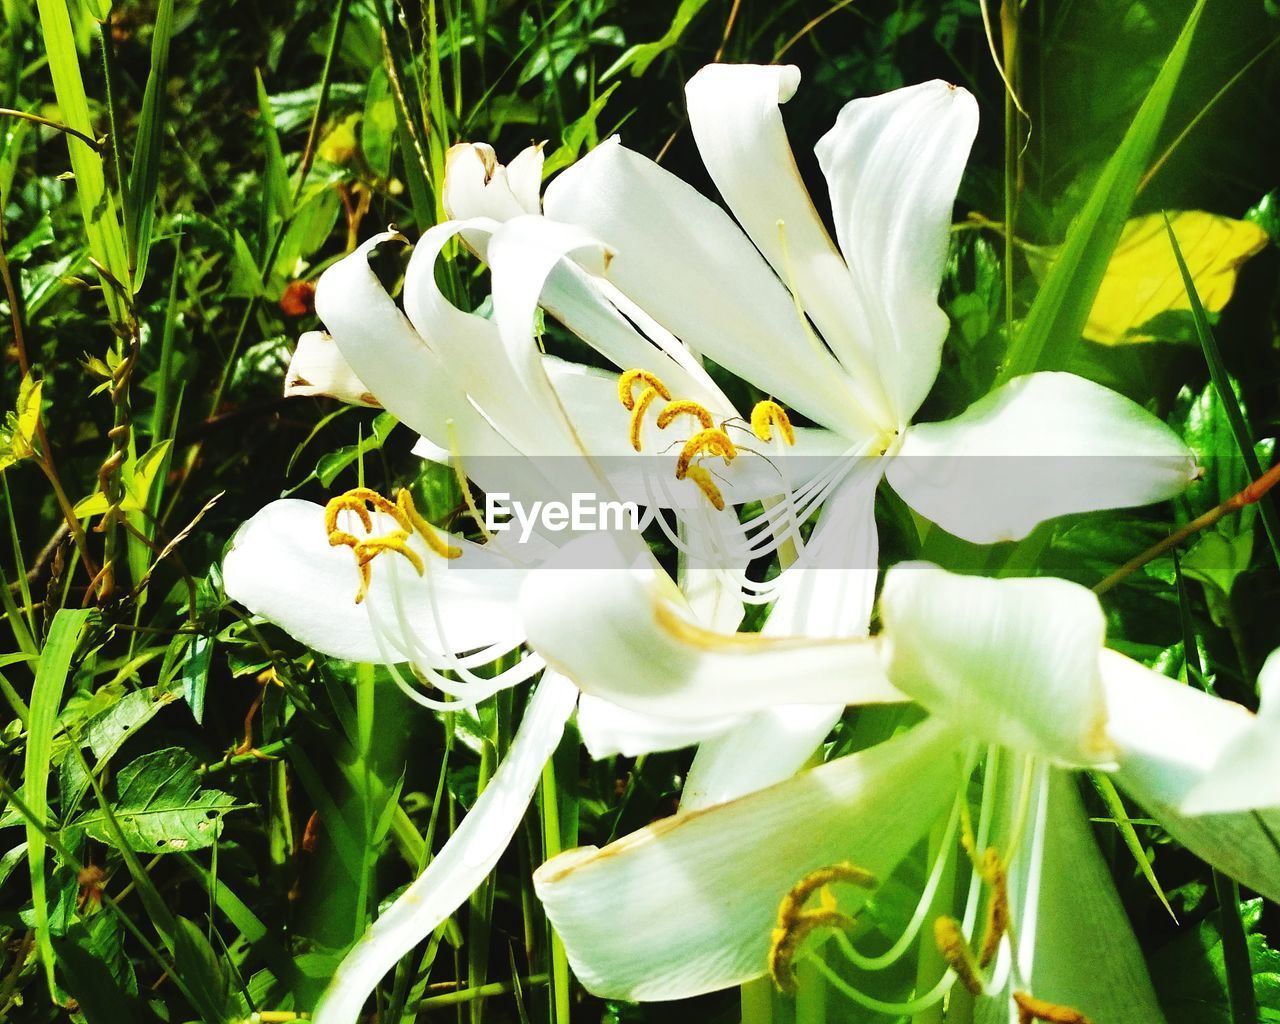 plant, flower, flowering plant, growth, lily, beauty in nature, freshness, white, petal, fragility, close-up, nature, flower head, inflorescence, yellow, green, no people, pollen, day, leaf, plant part, springtime, outdoors, botany, blossom, stamen, grass